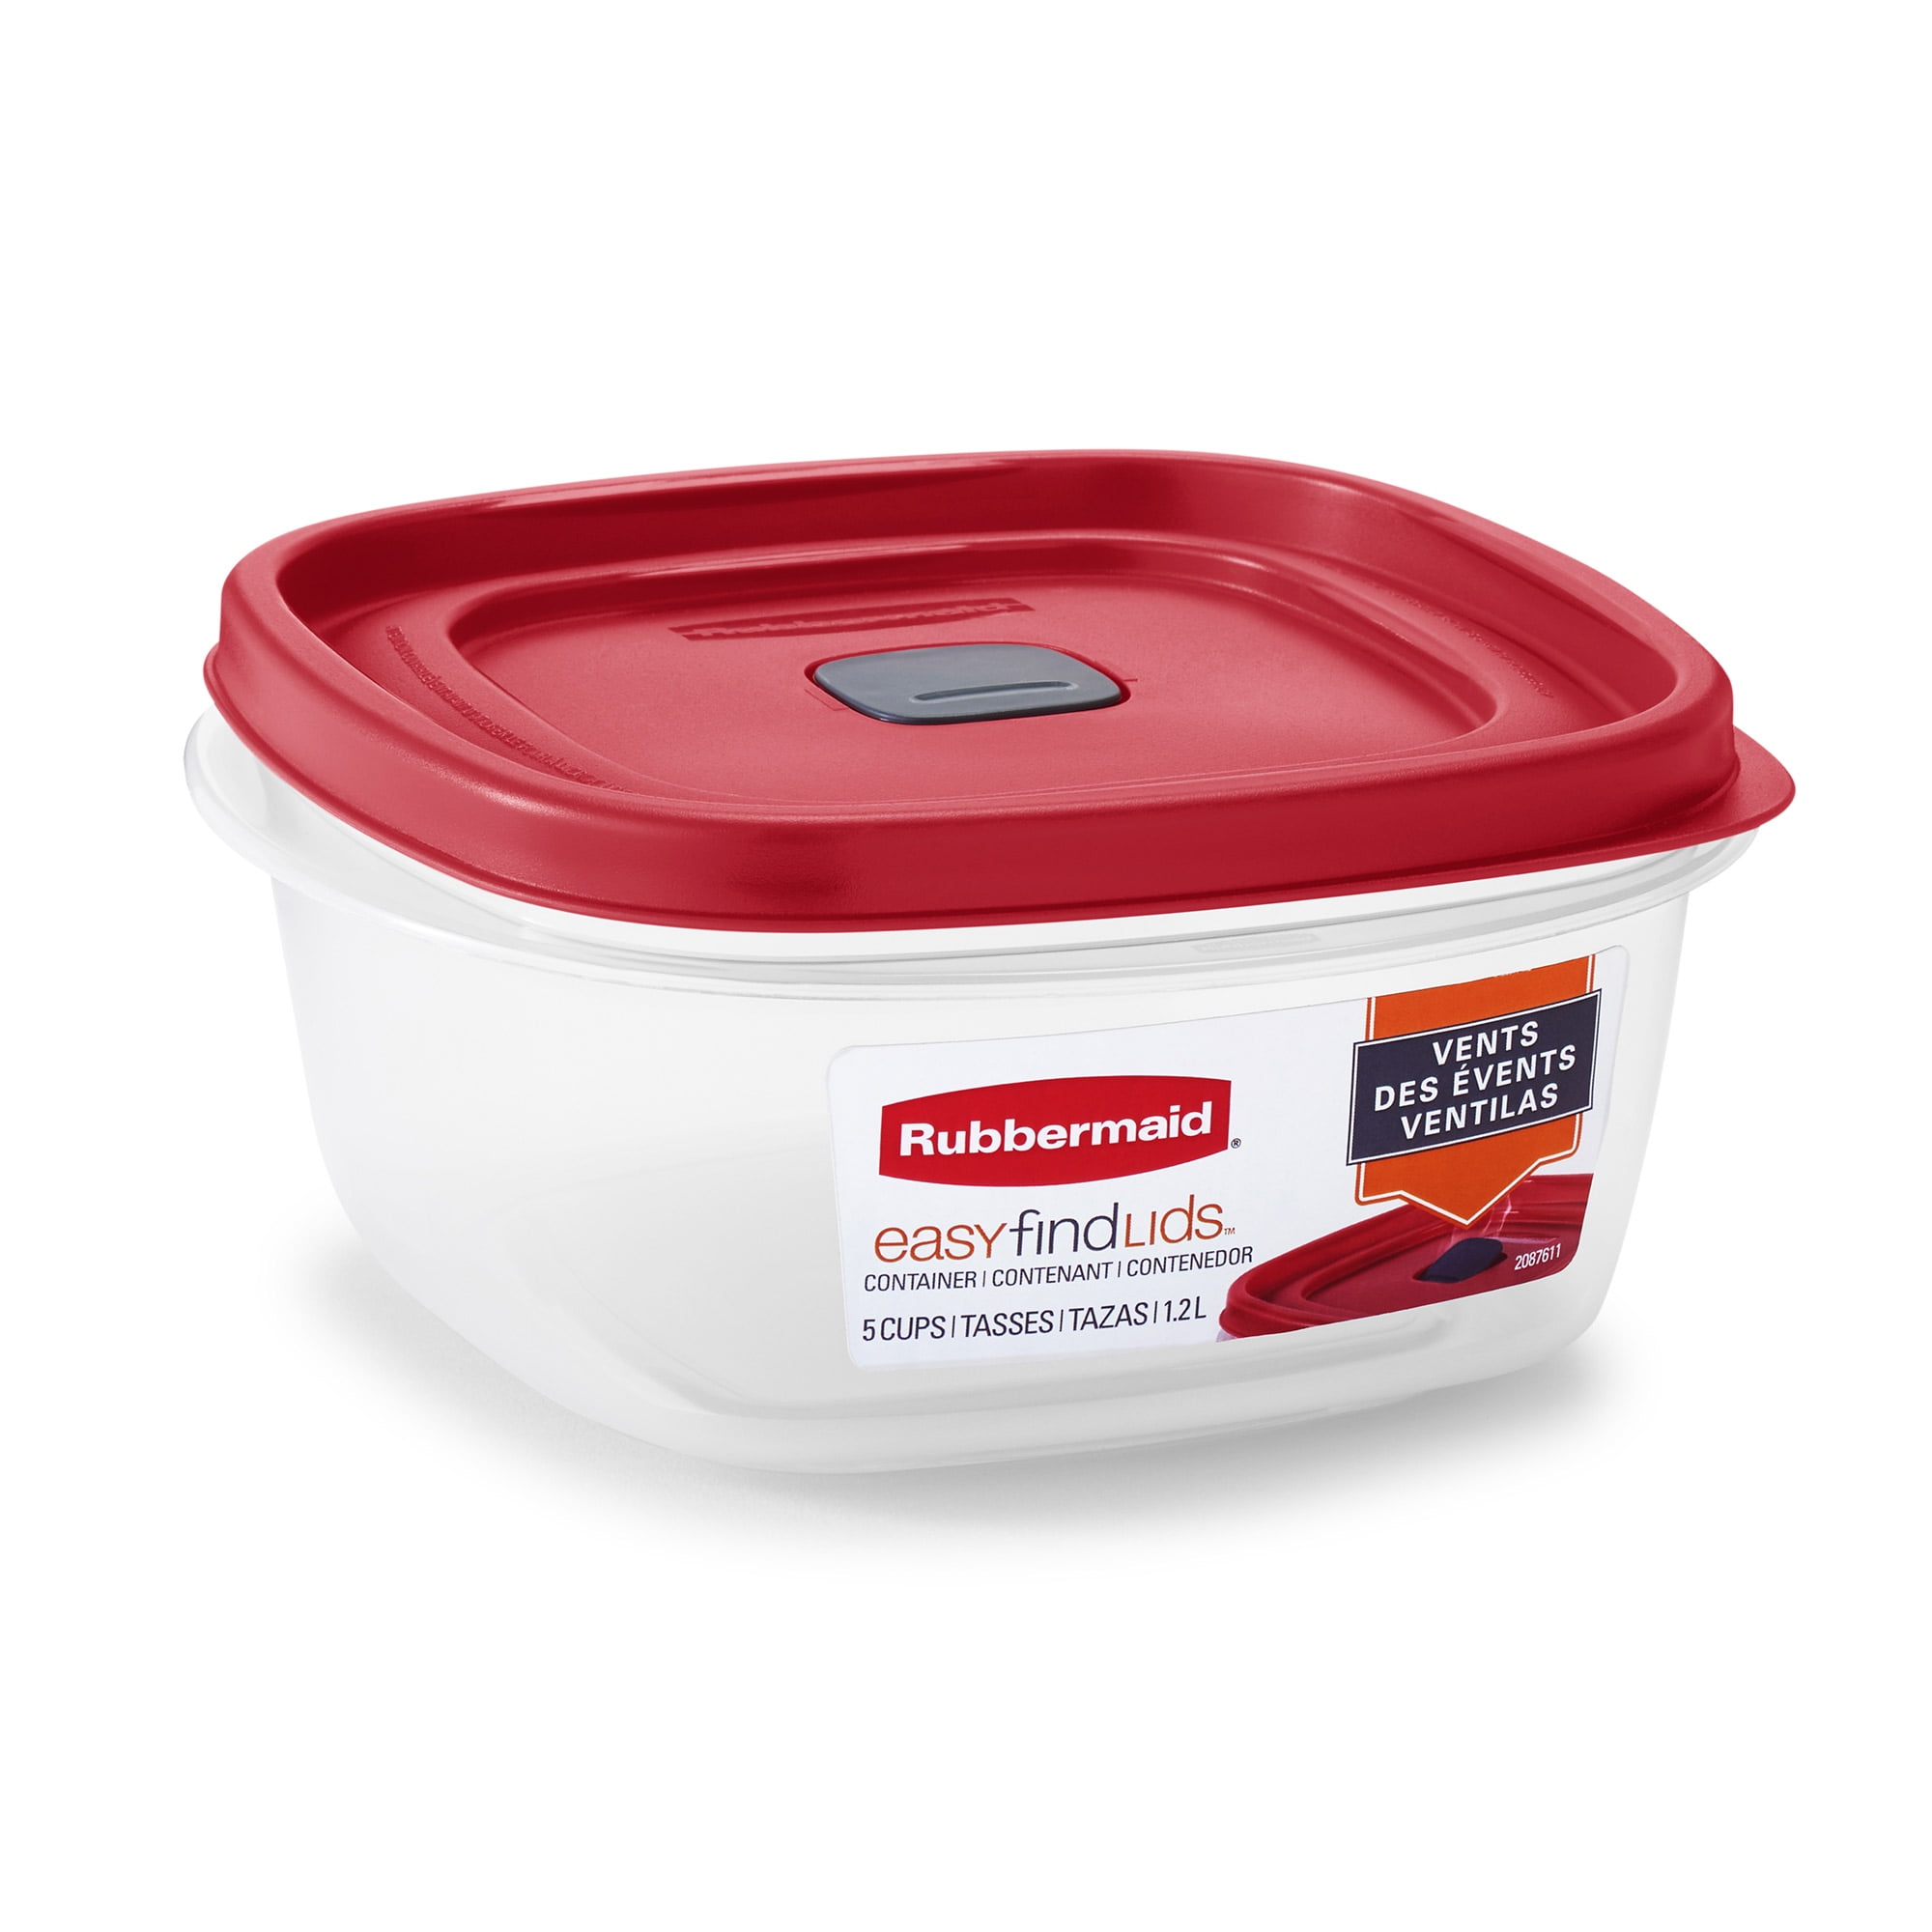  NEW Genuine Rubbermaid Lids for Replacement Easy Find